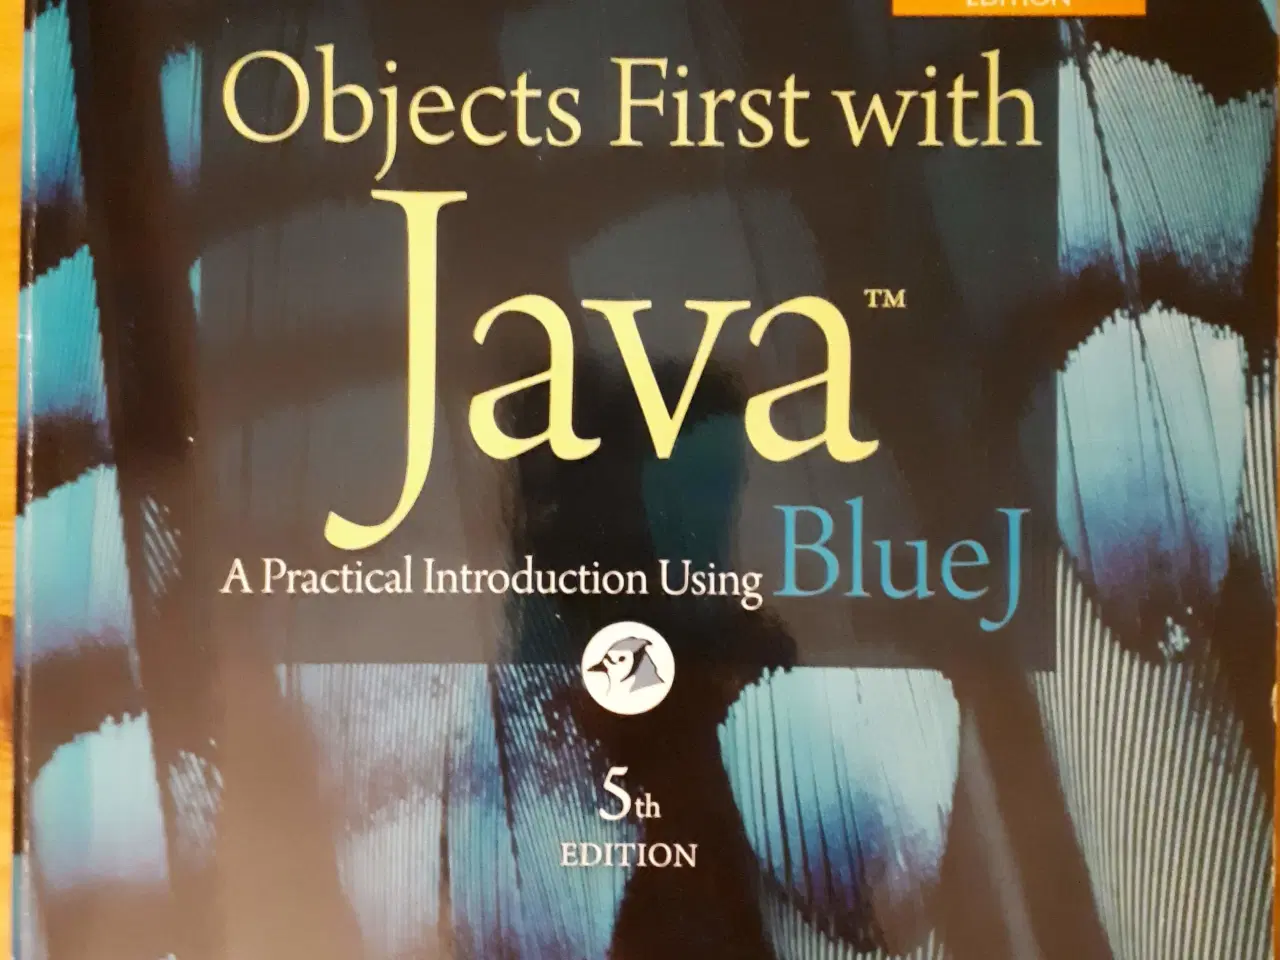 Billede 1 - Objects First with Java, David J. Barnes